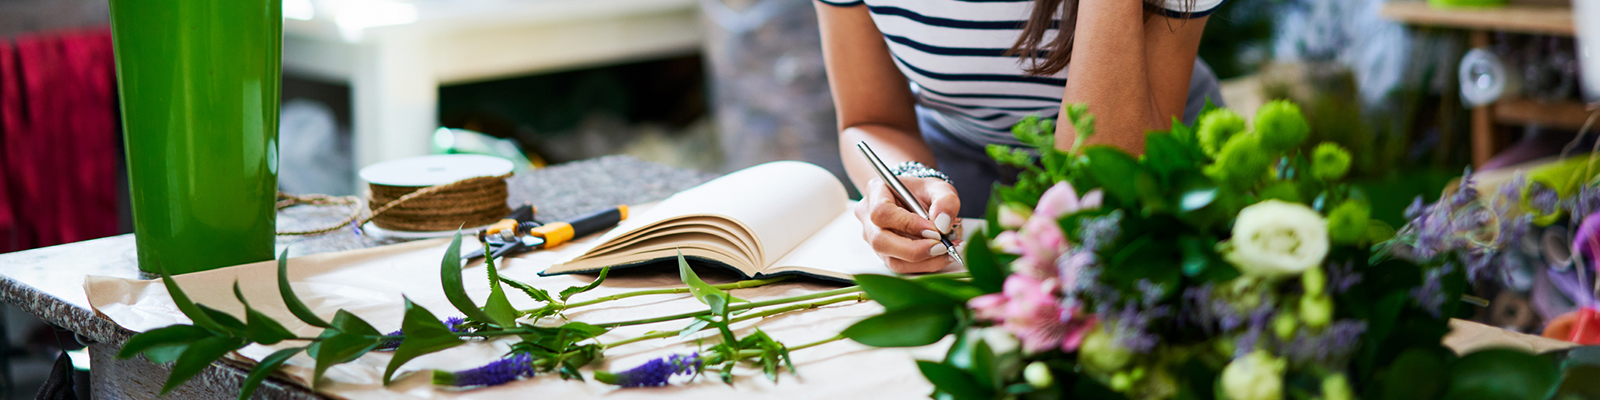 Florist writing notes in journal